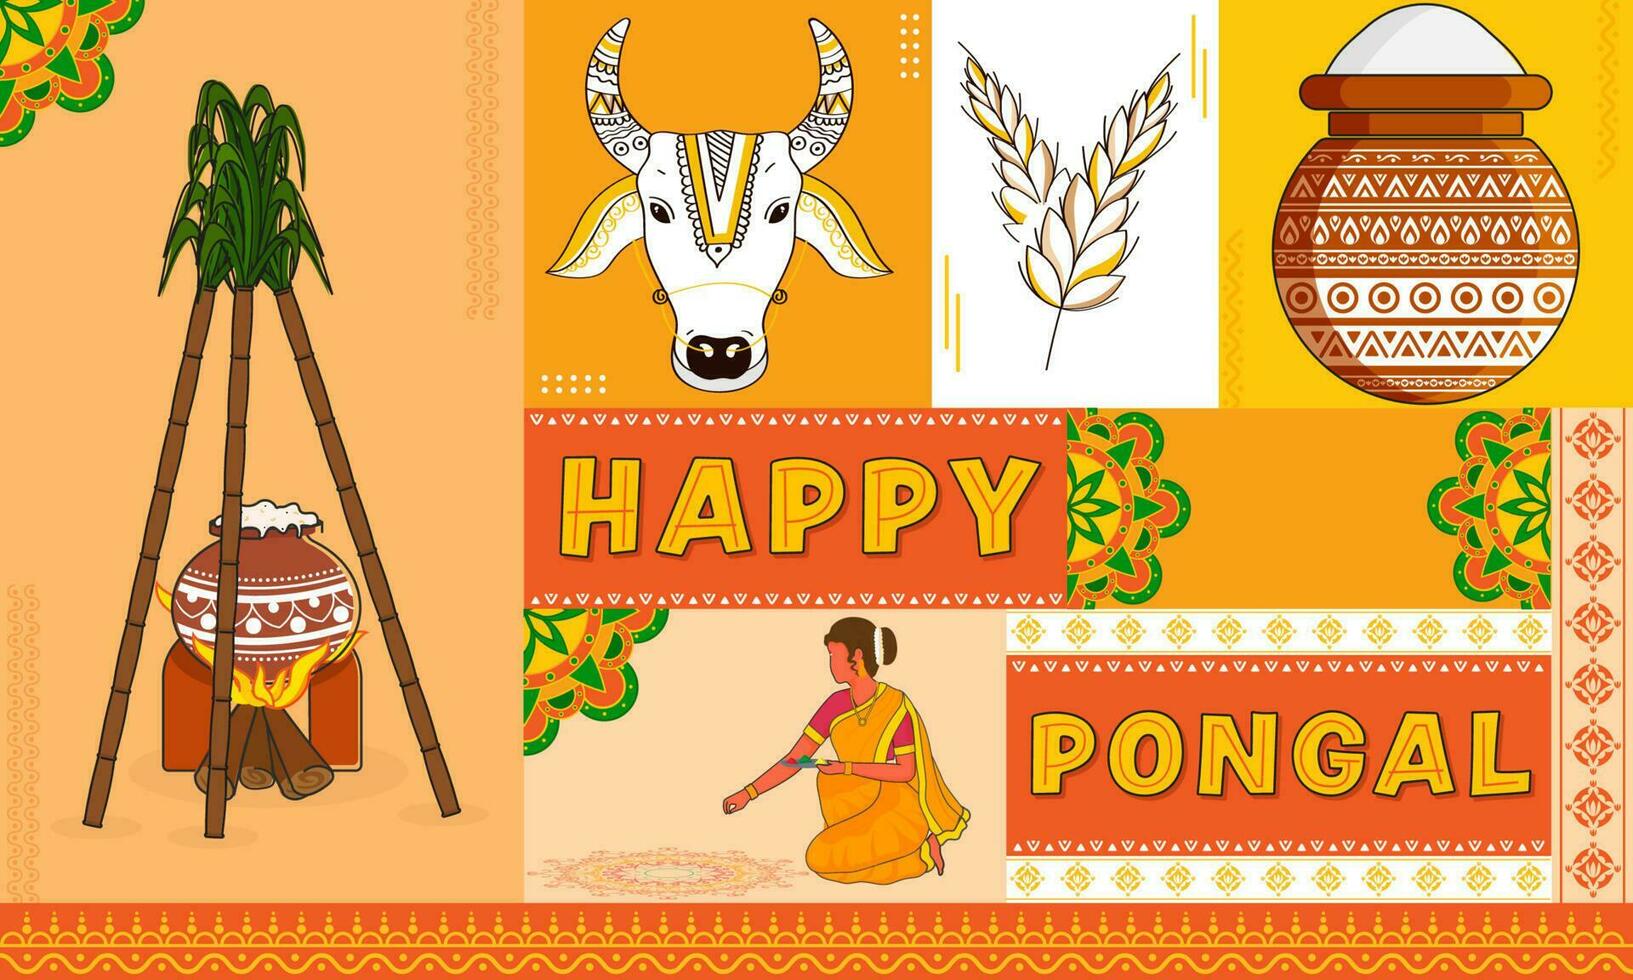 Happy Pongal Celebration Background With South Indian Woman, Traditional Dish Cooking At Bonfire, Cow Or Bull Face And Sugarcane. vector